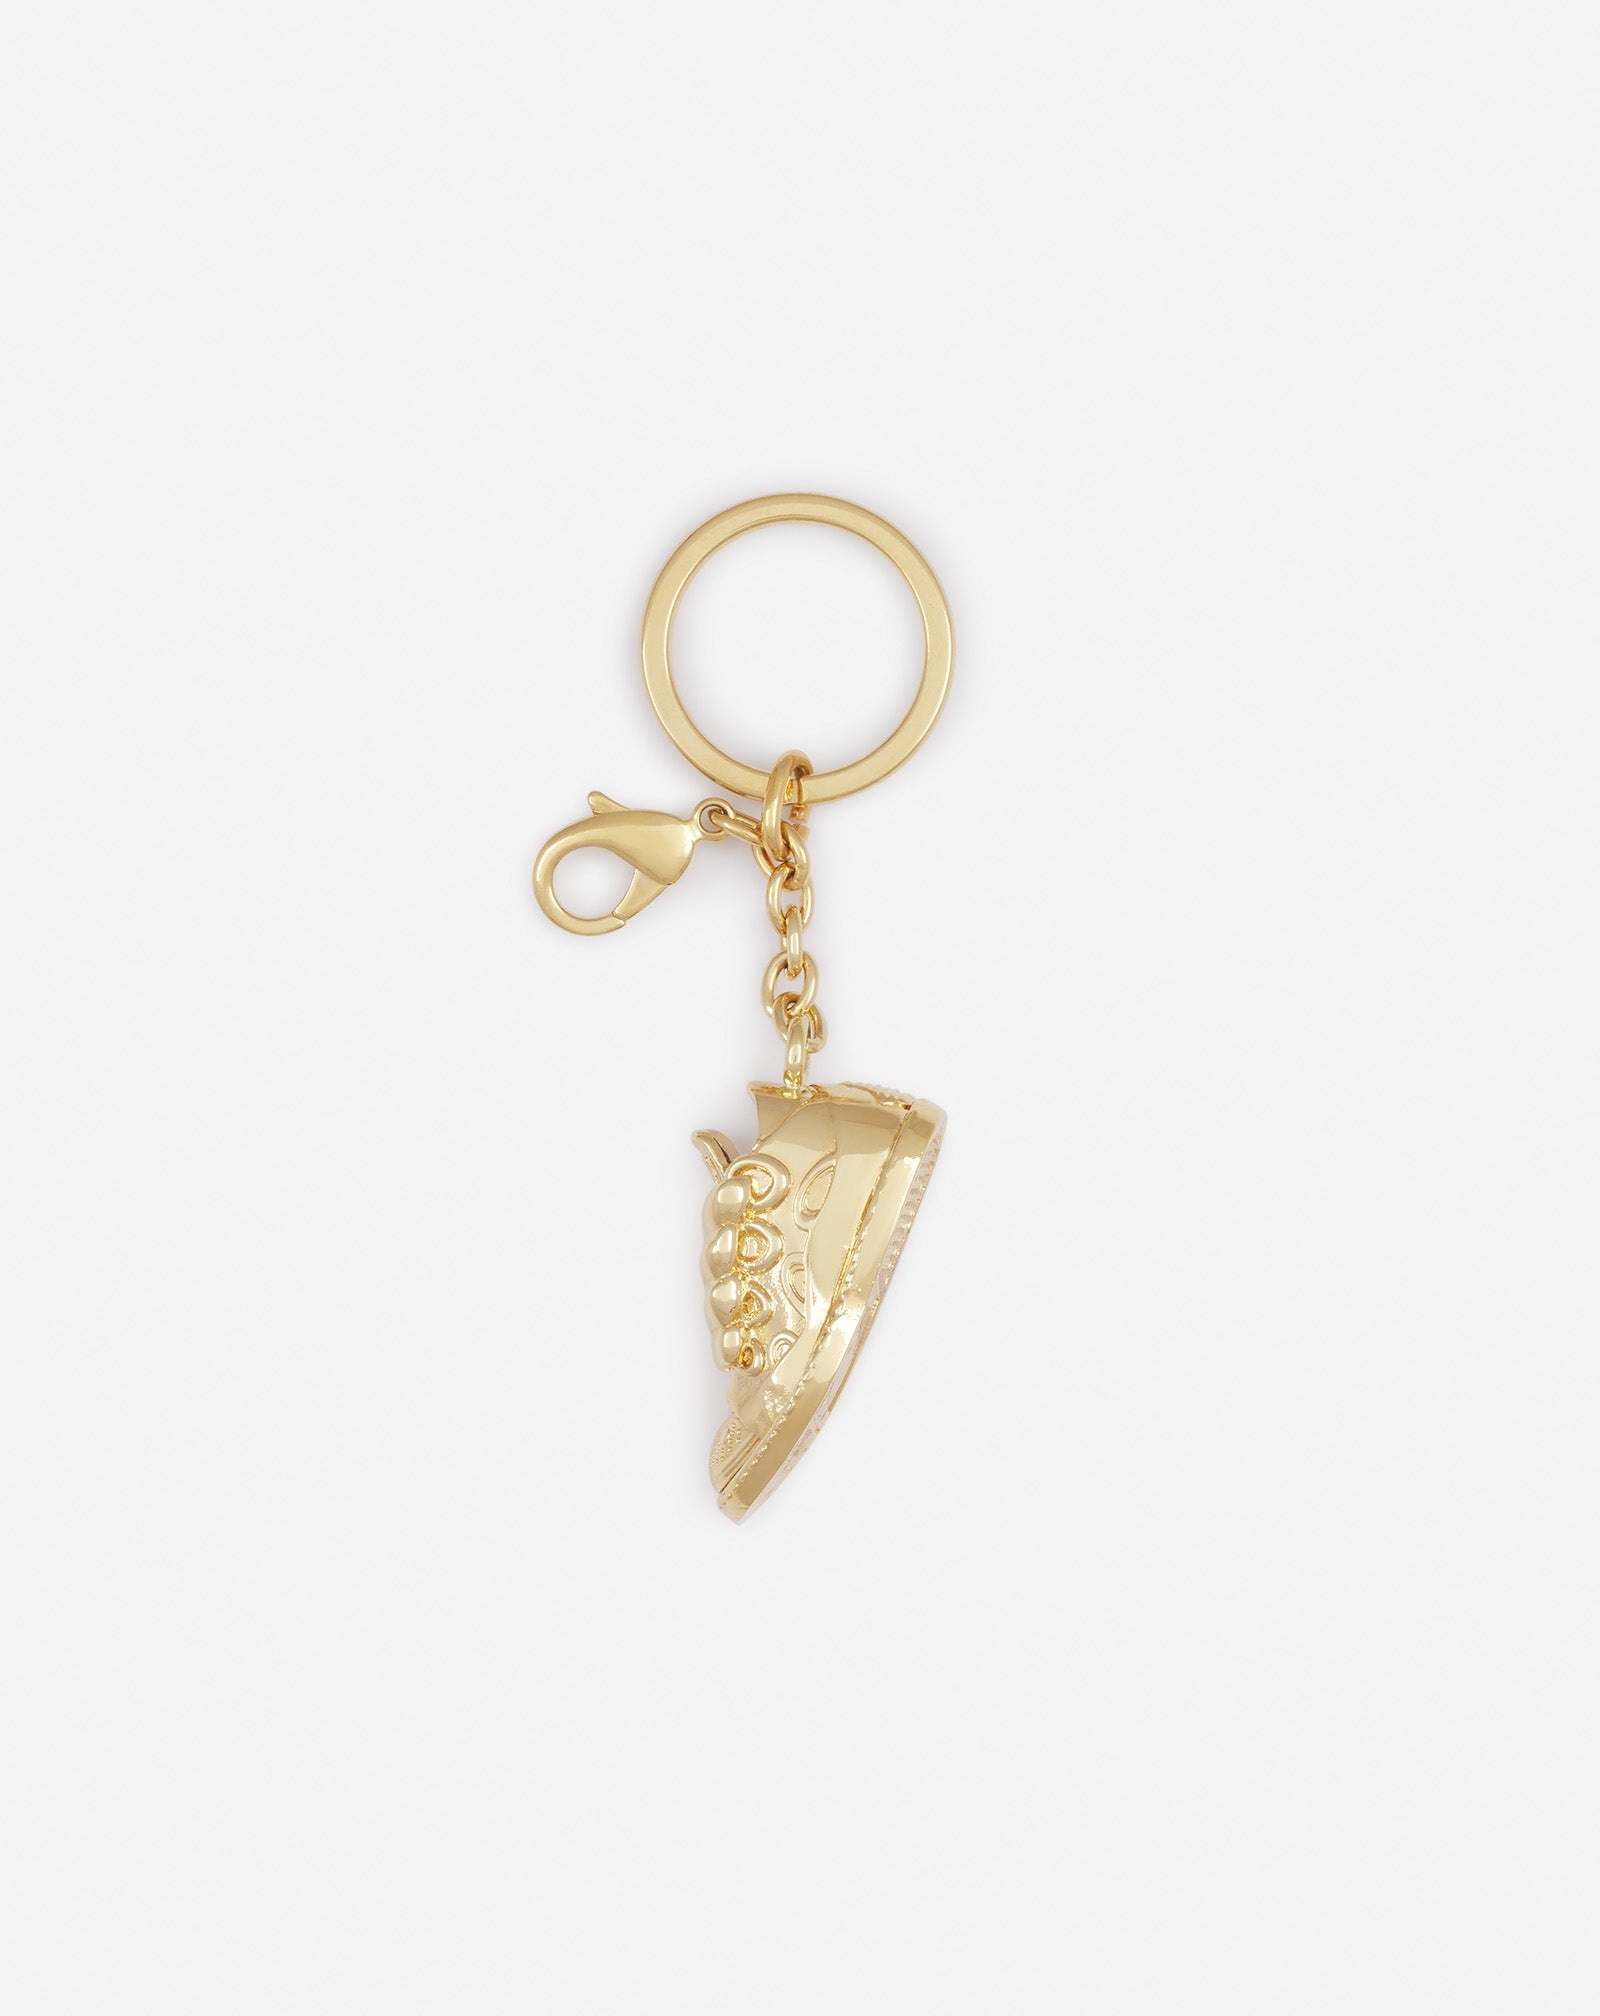 CURB SNEAKERS BRASS KEY RING - 2